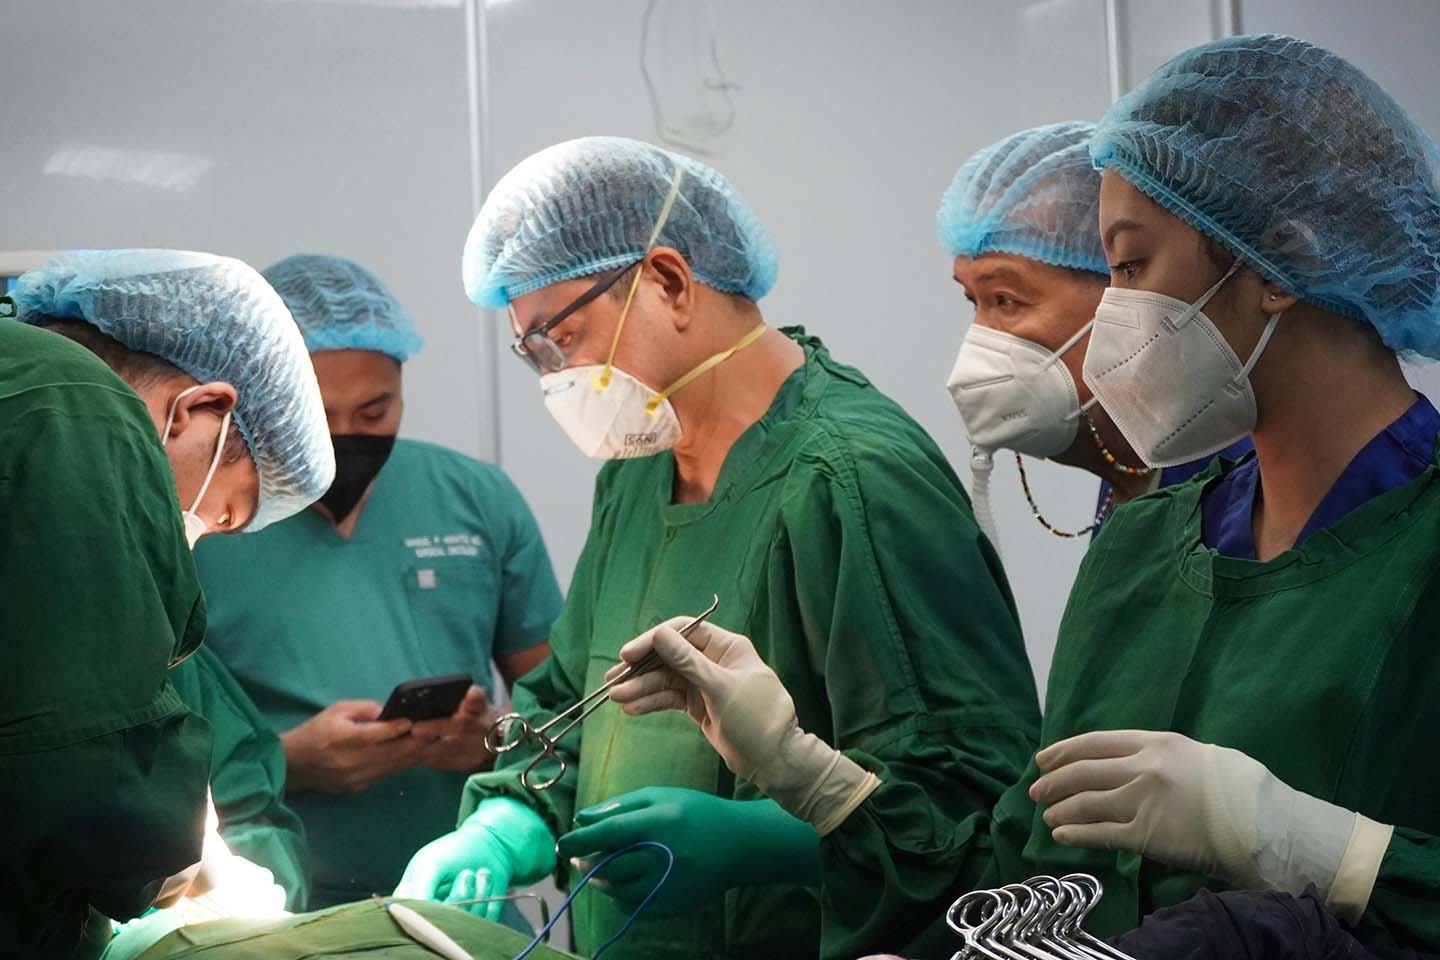 A surgical team in the middle of a surgery in the operating room.